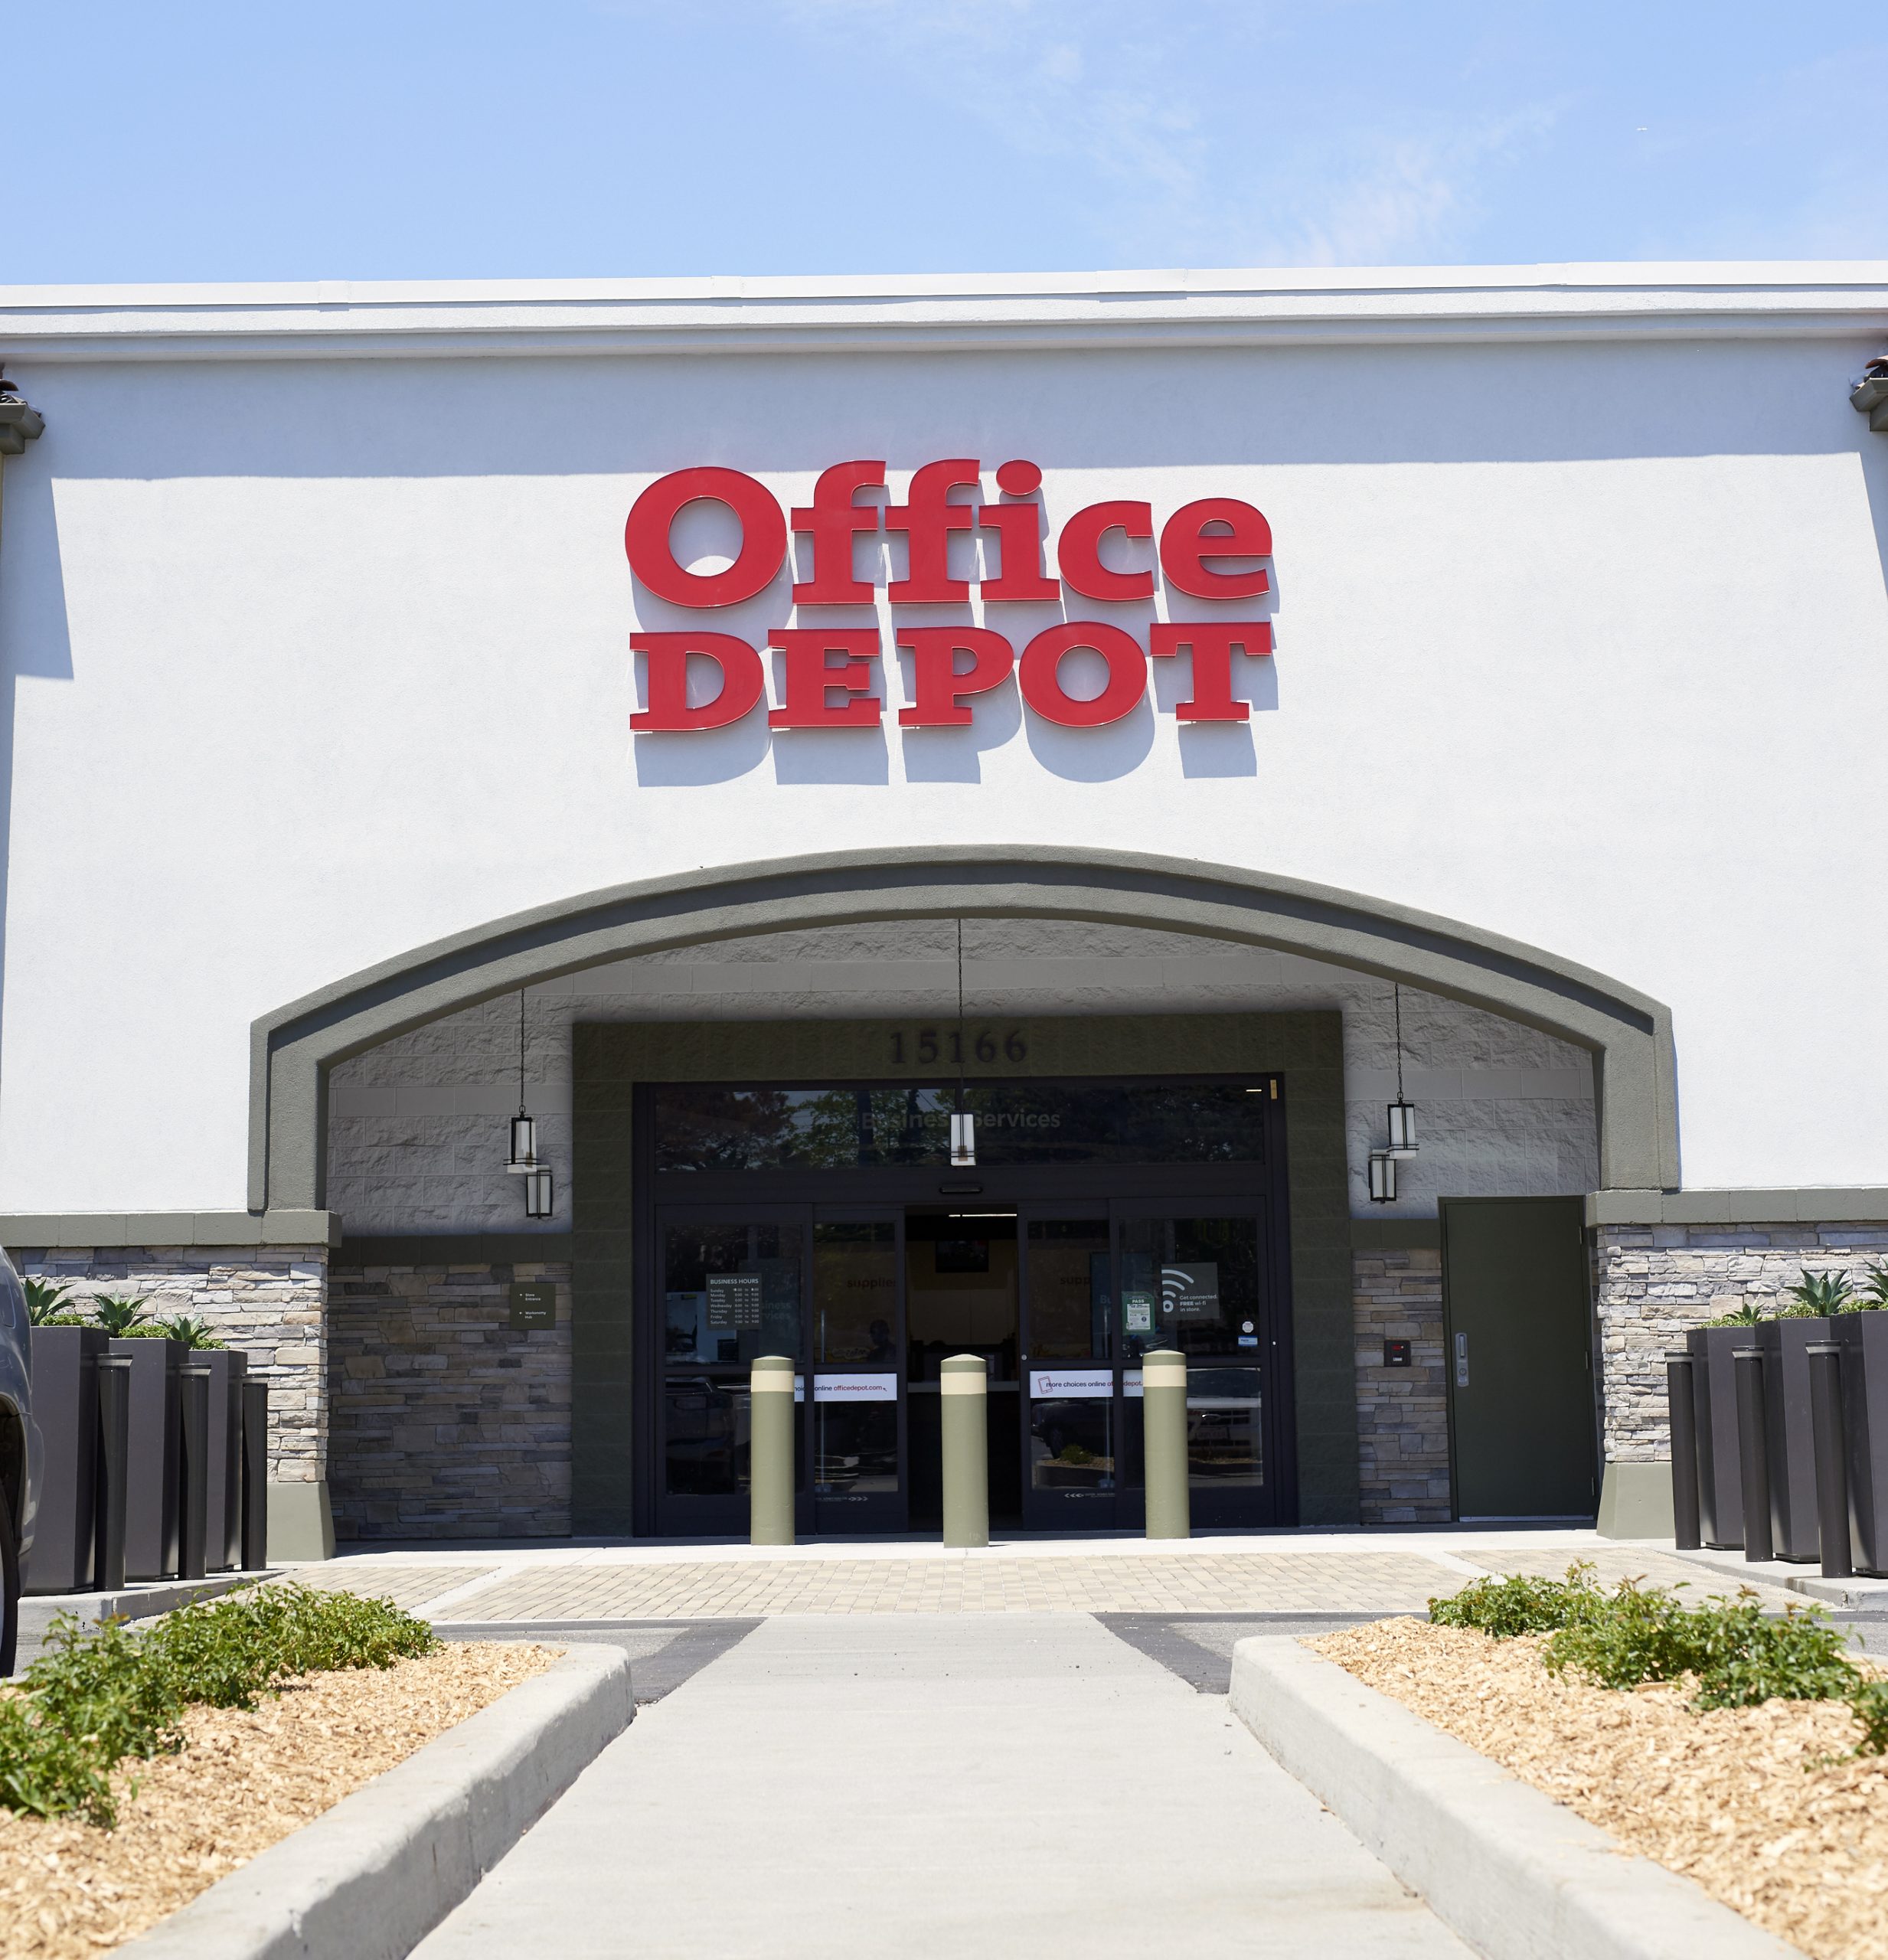 Office Depot now offers same-day delivery - The Recycler - 24/01/2020